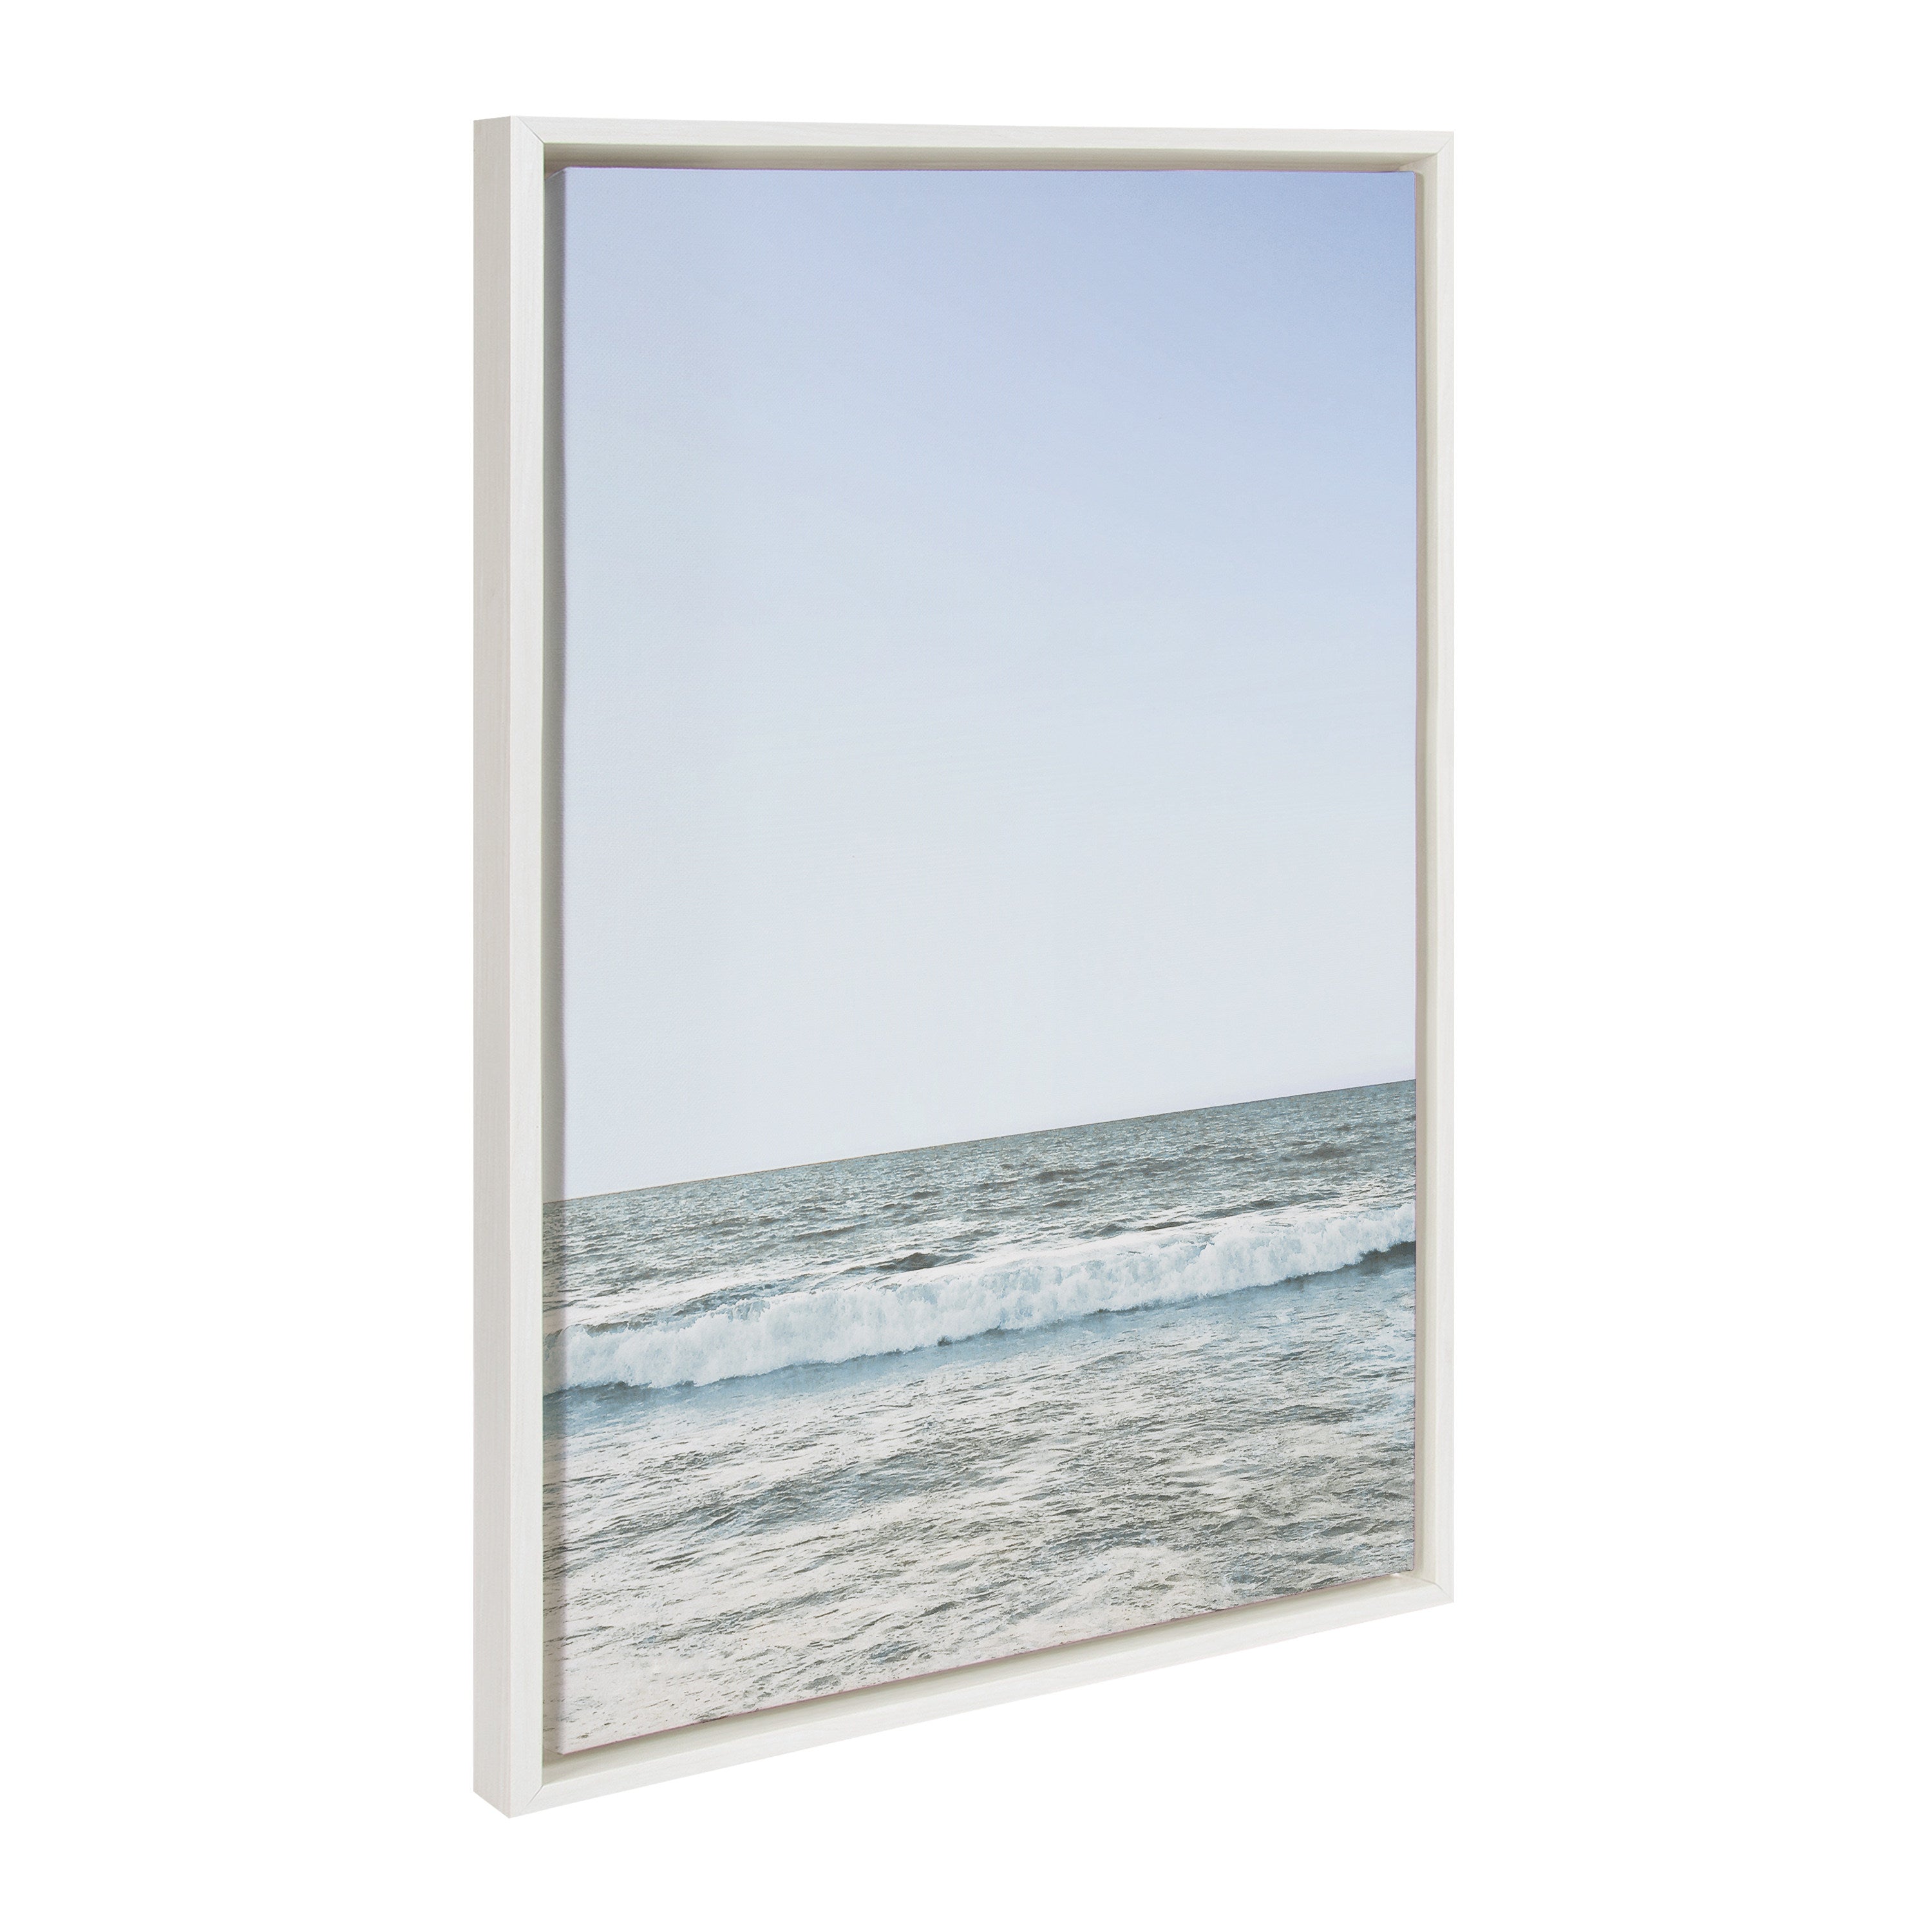 Sylvie Pale Blue Sea Framed Canvas by The Creative Bunch Studio